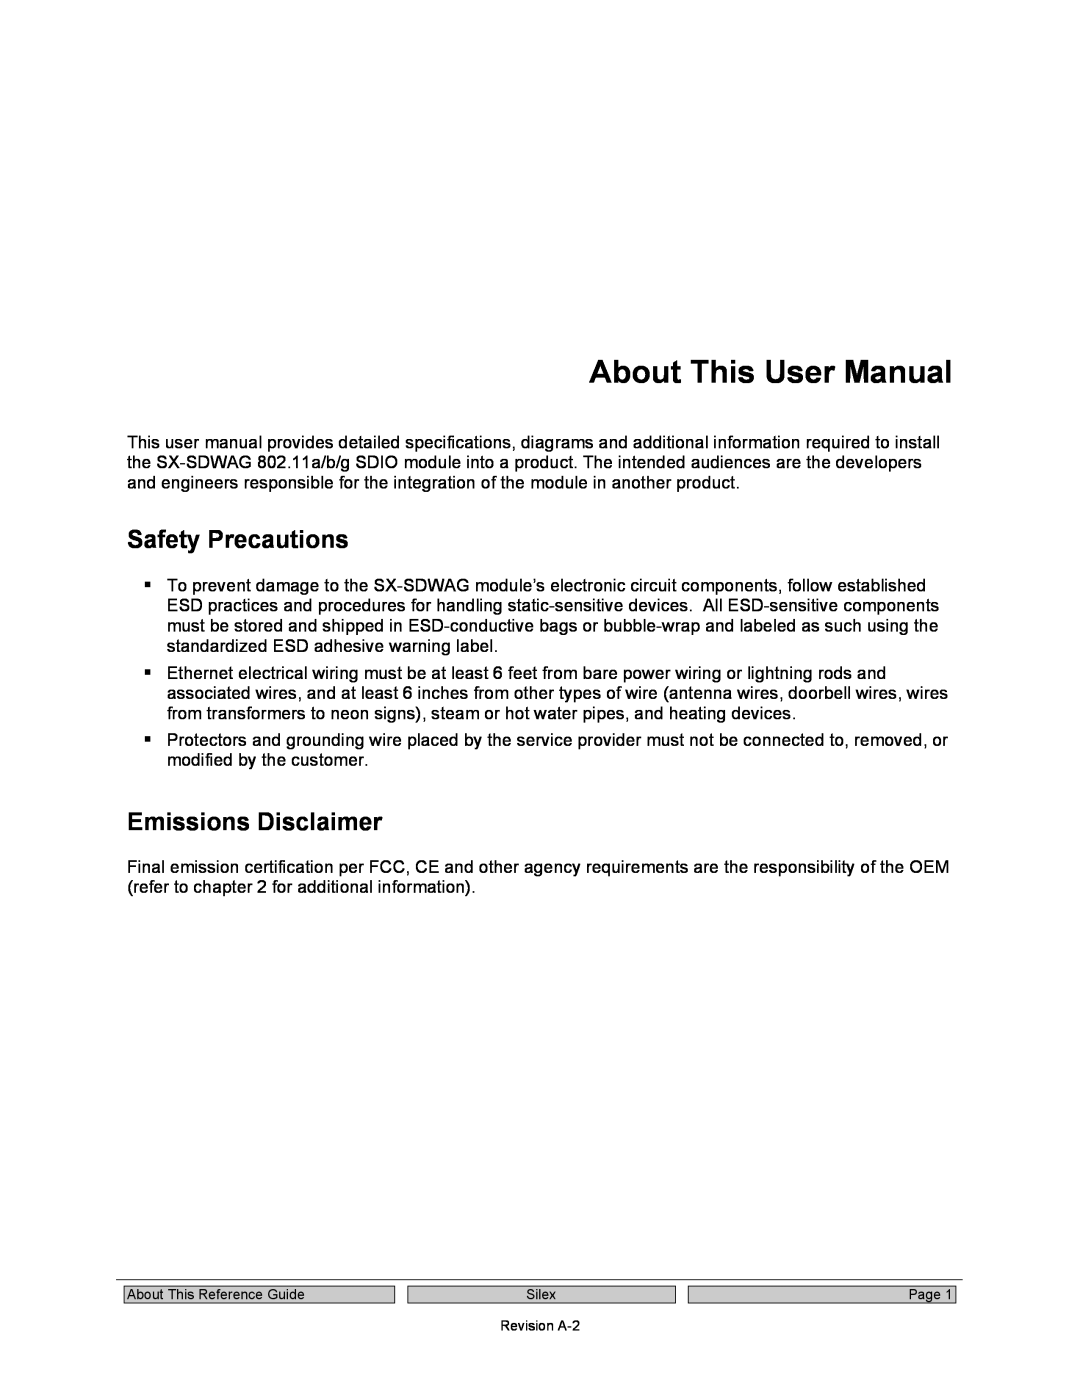 Silex technology SX-SDWAG user manual About This User Manual, Safety Precautions, Emissions Disclaimer 